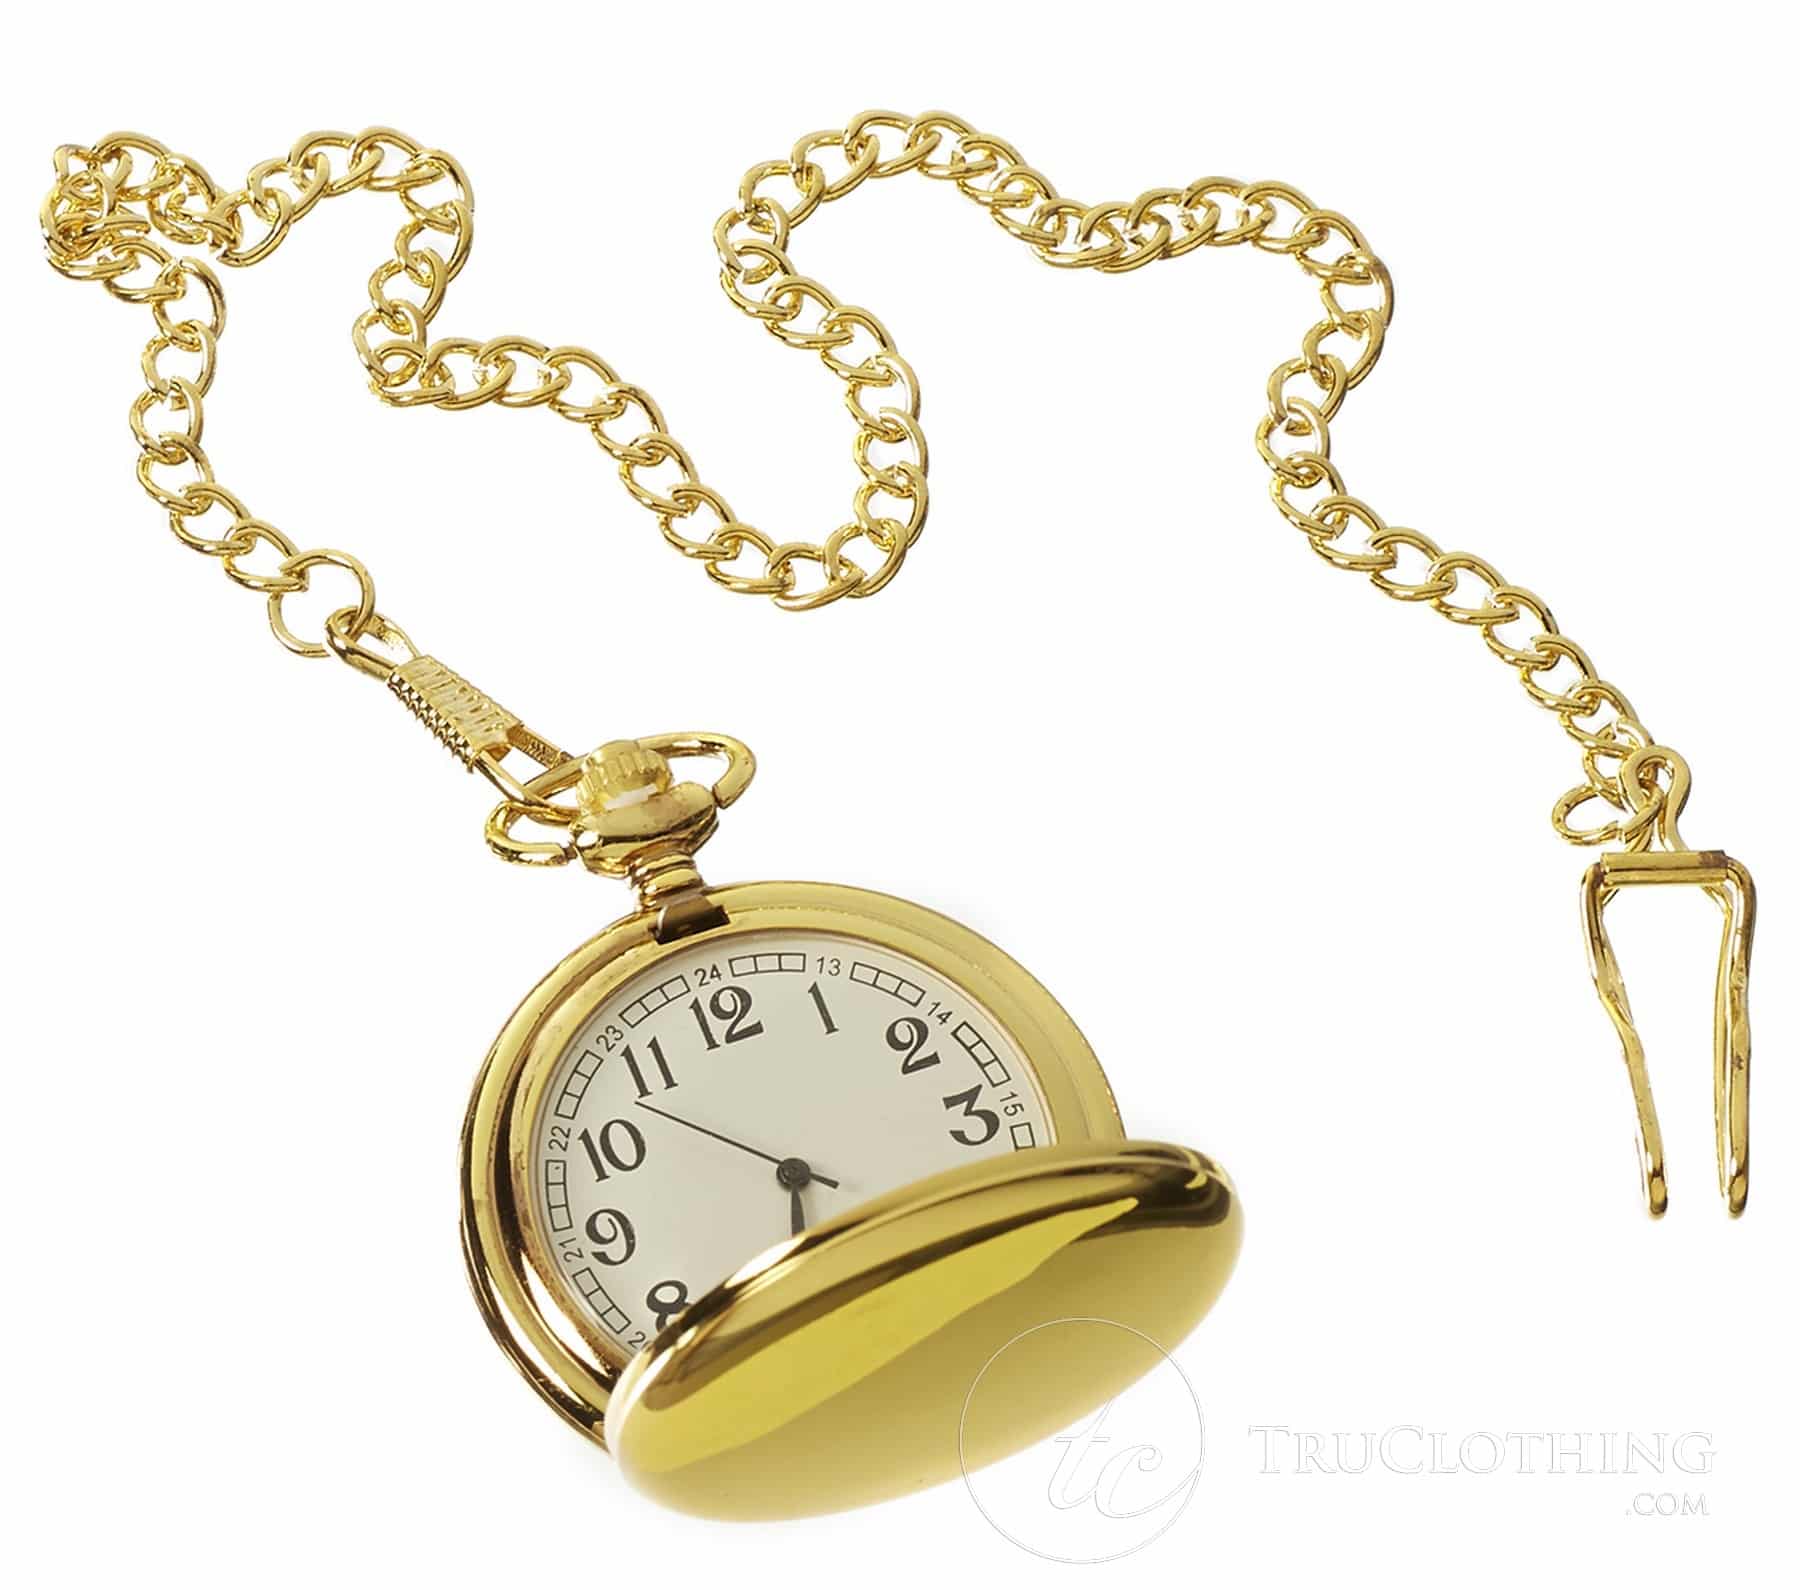 Gold Pocket Watch With Chain